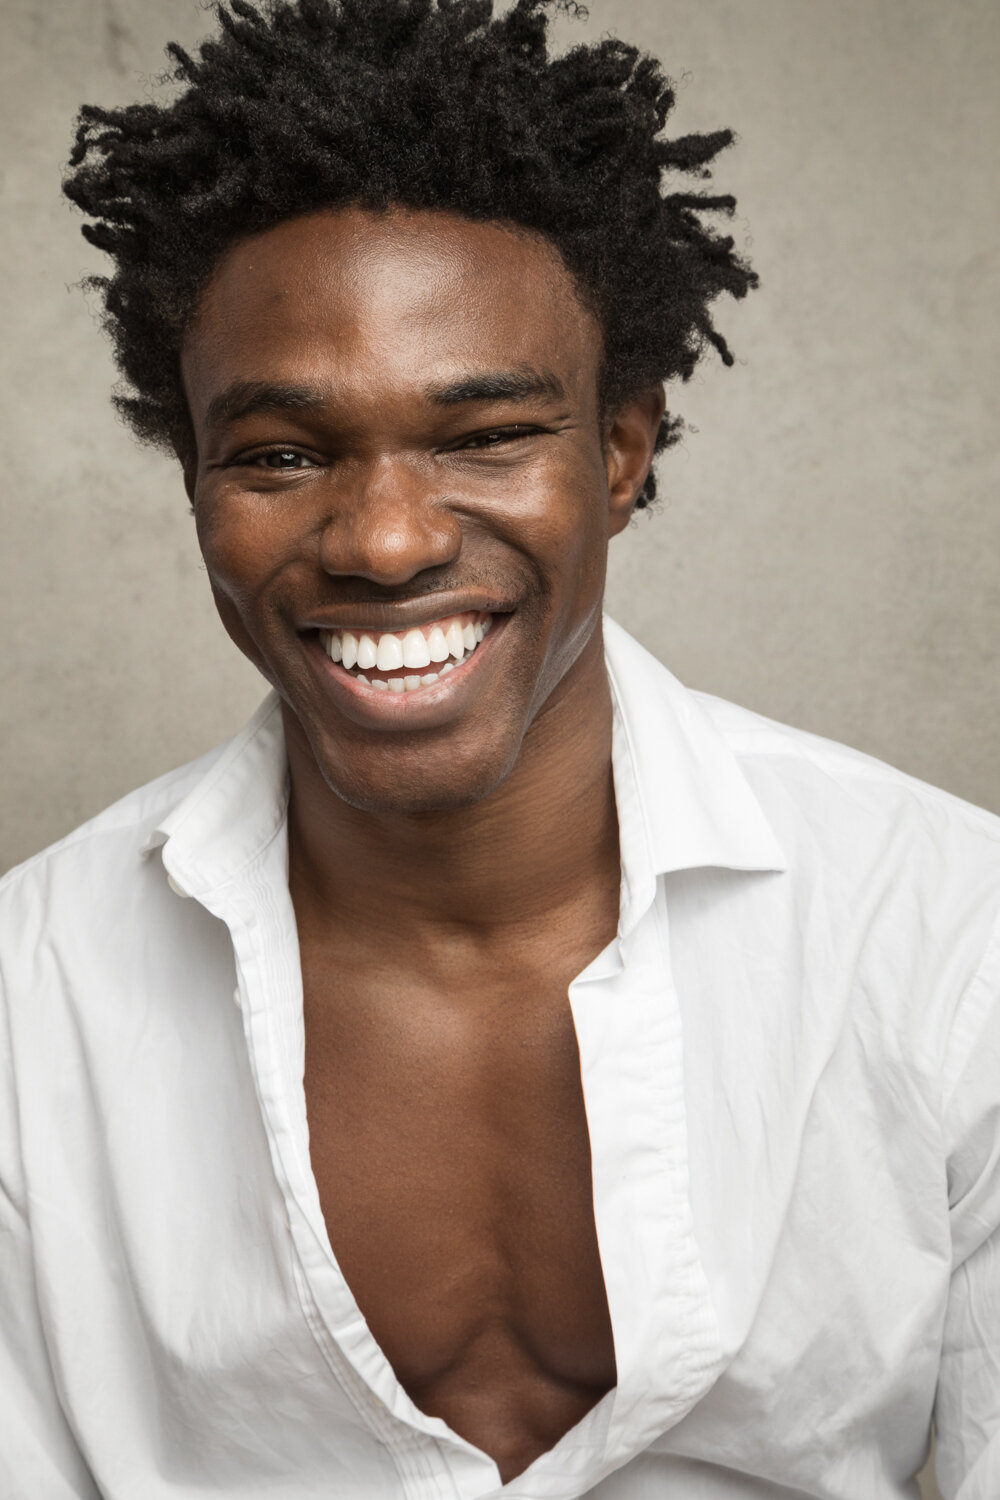 Actor: Kelly Osasere